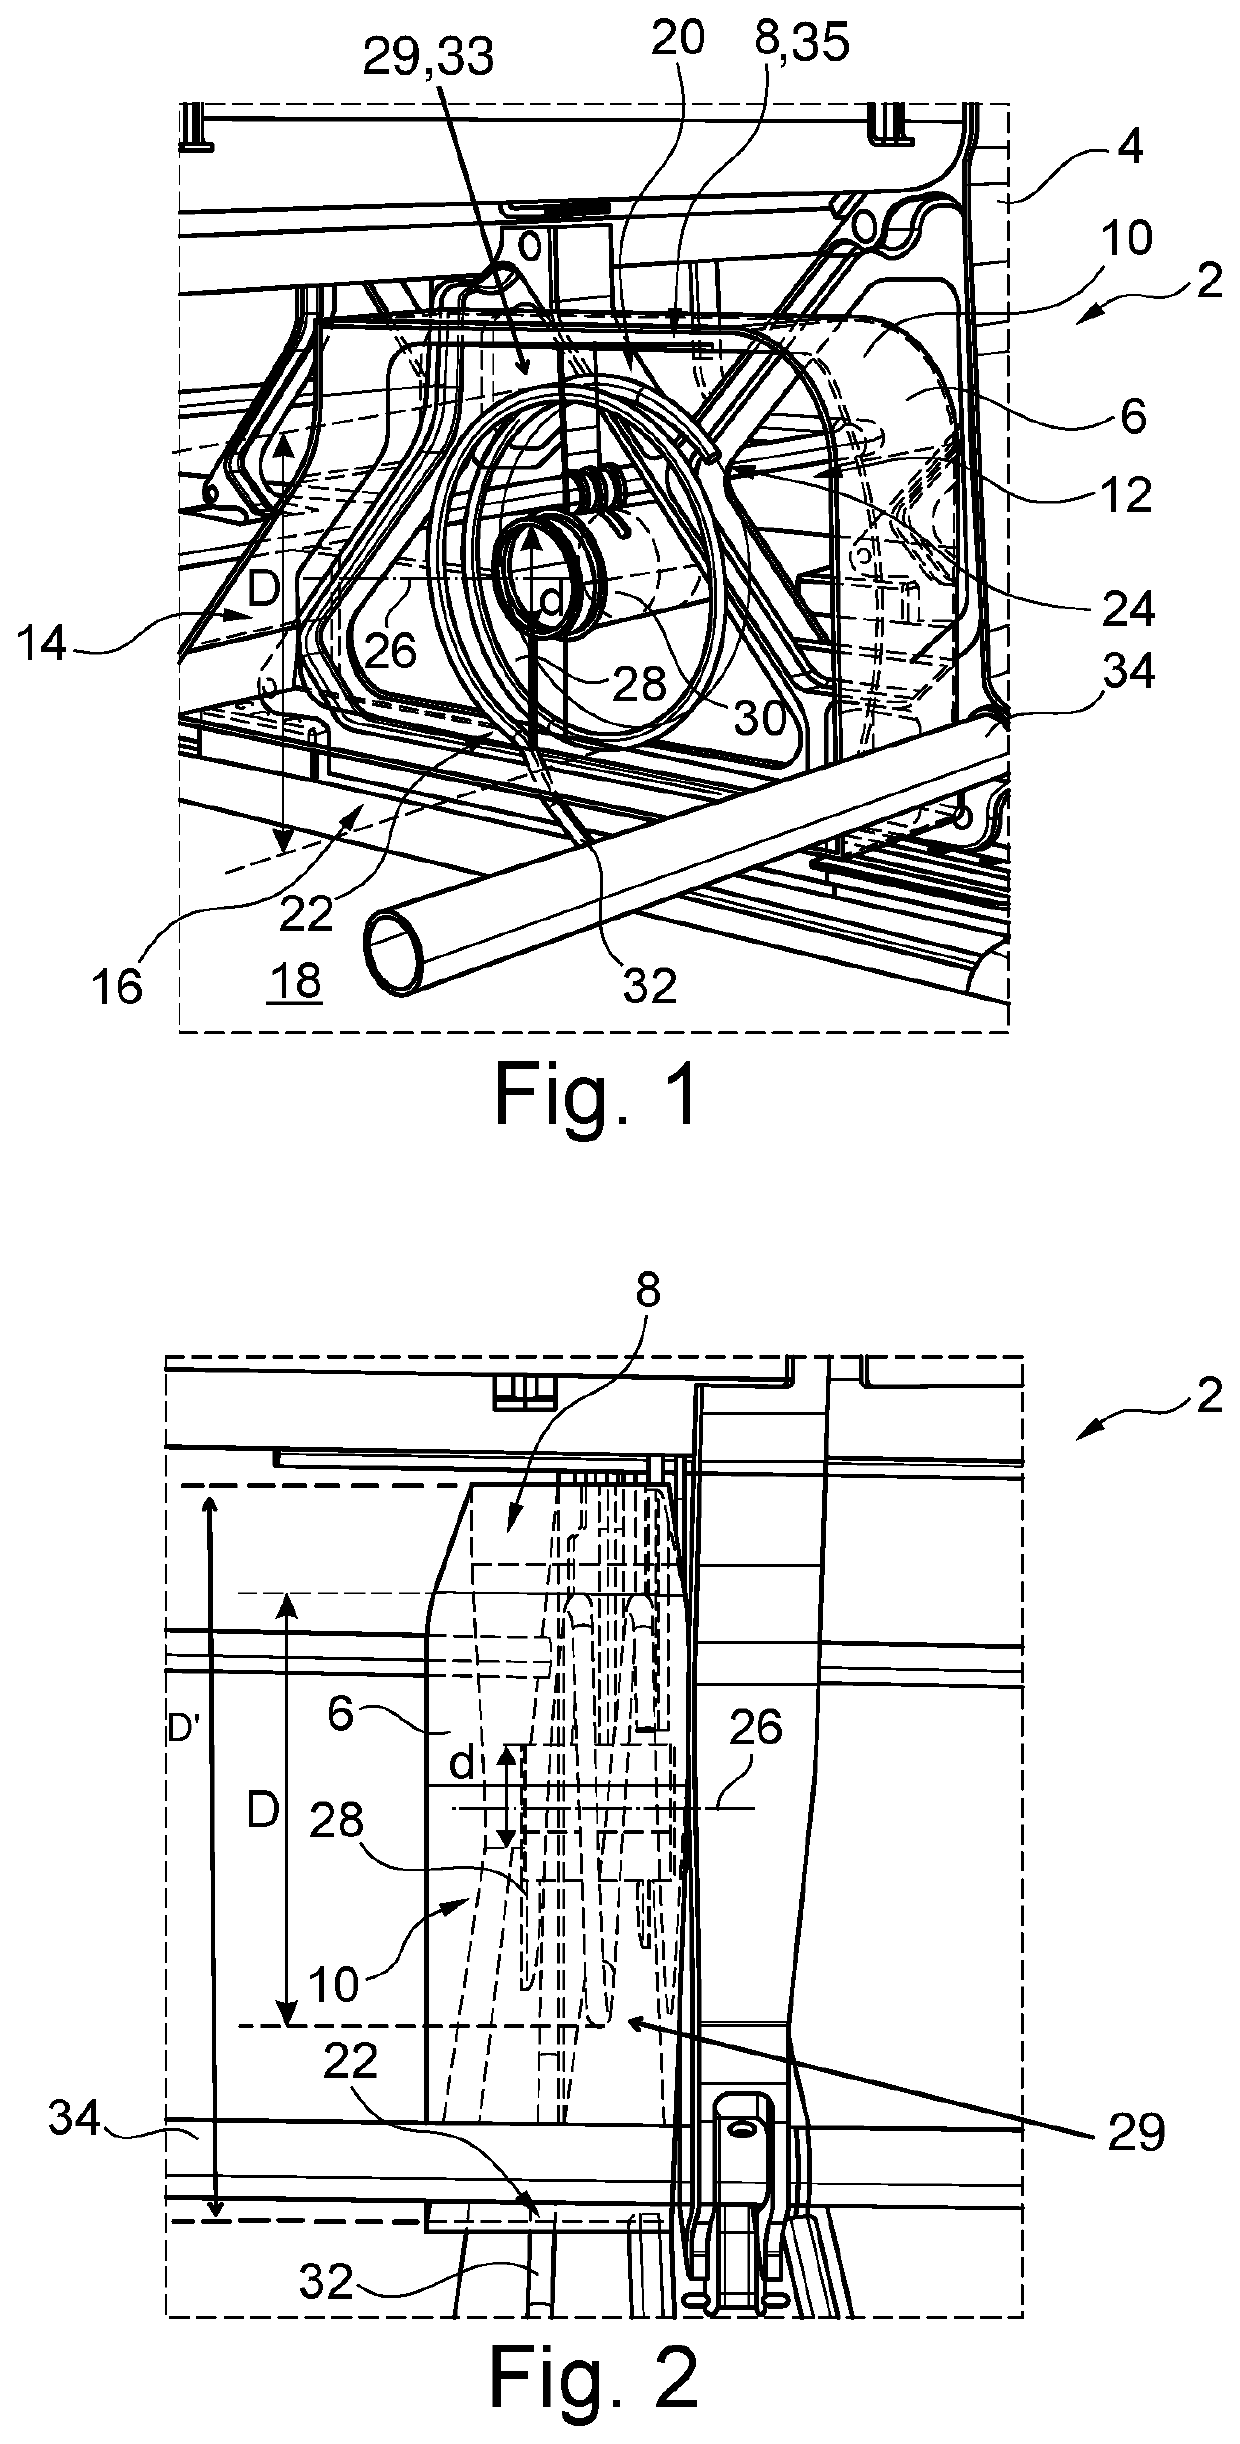 Connection system for electrically connecting a fixture in a vehicle